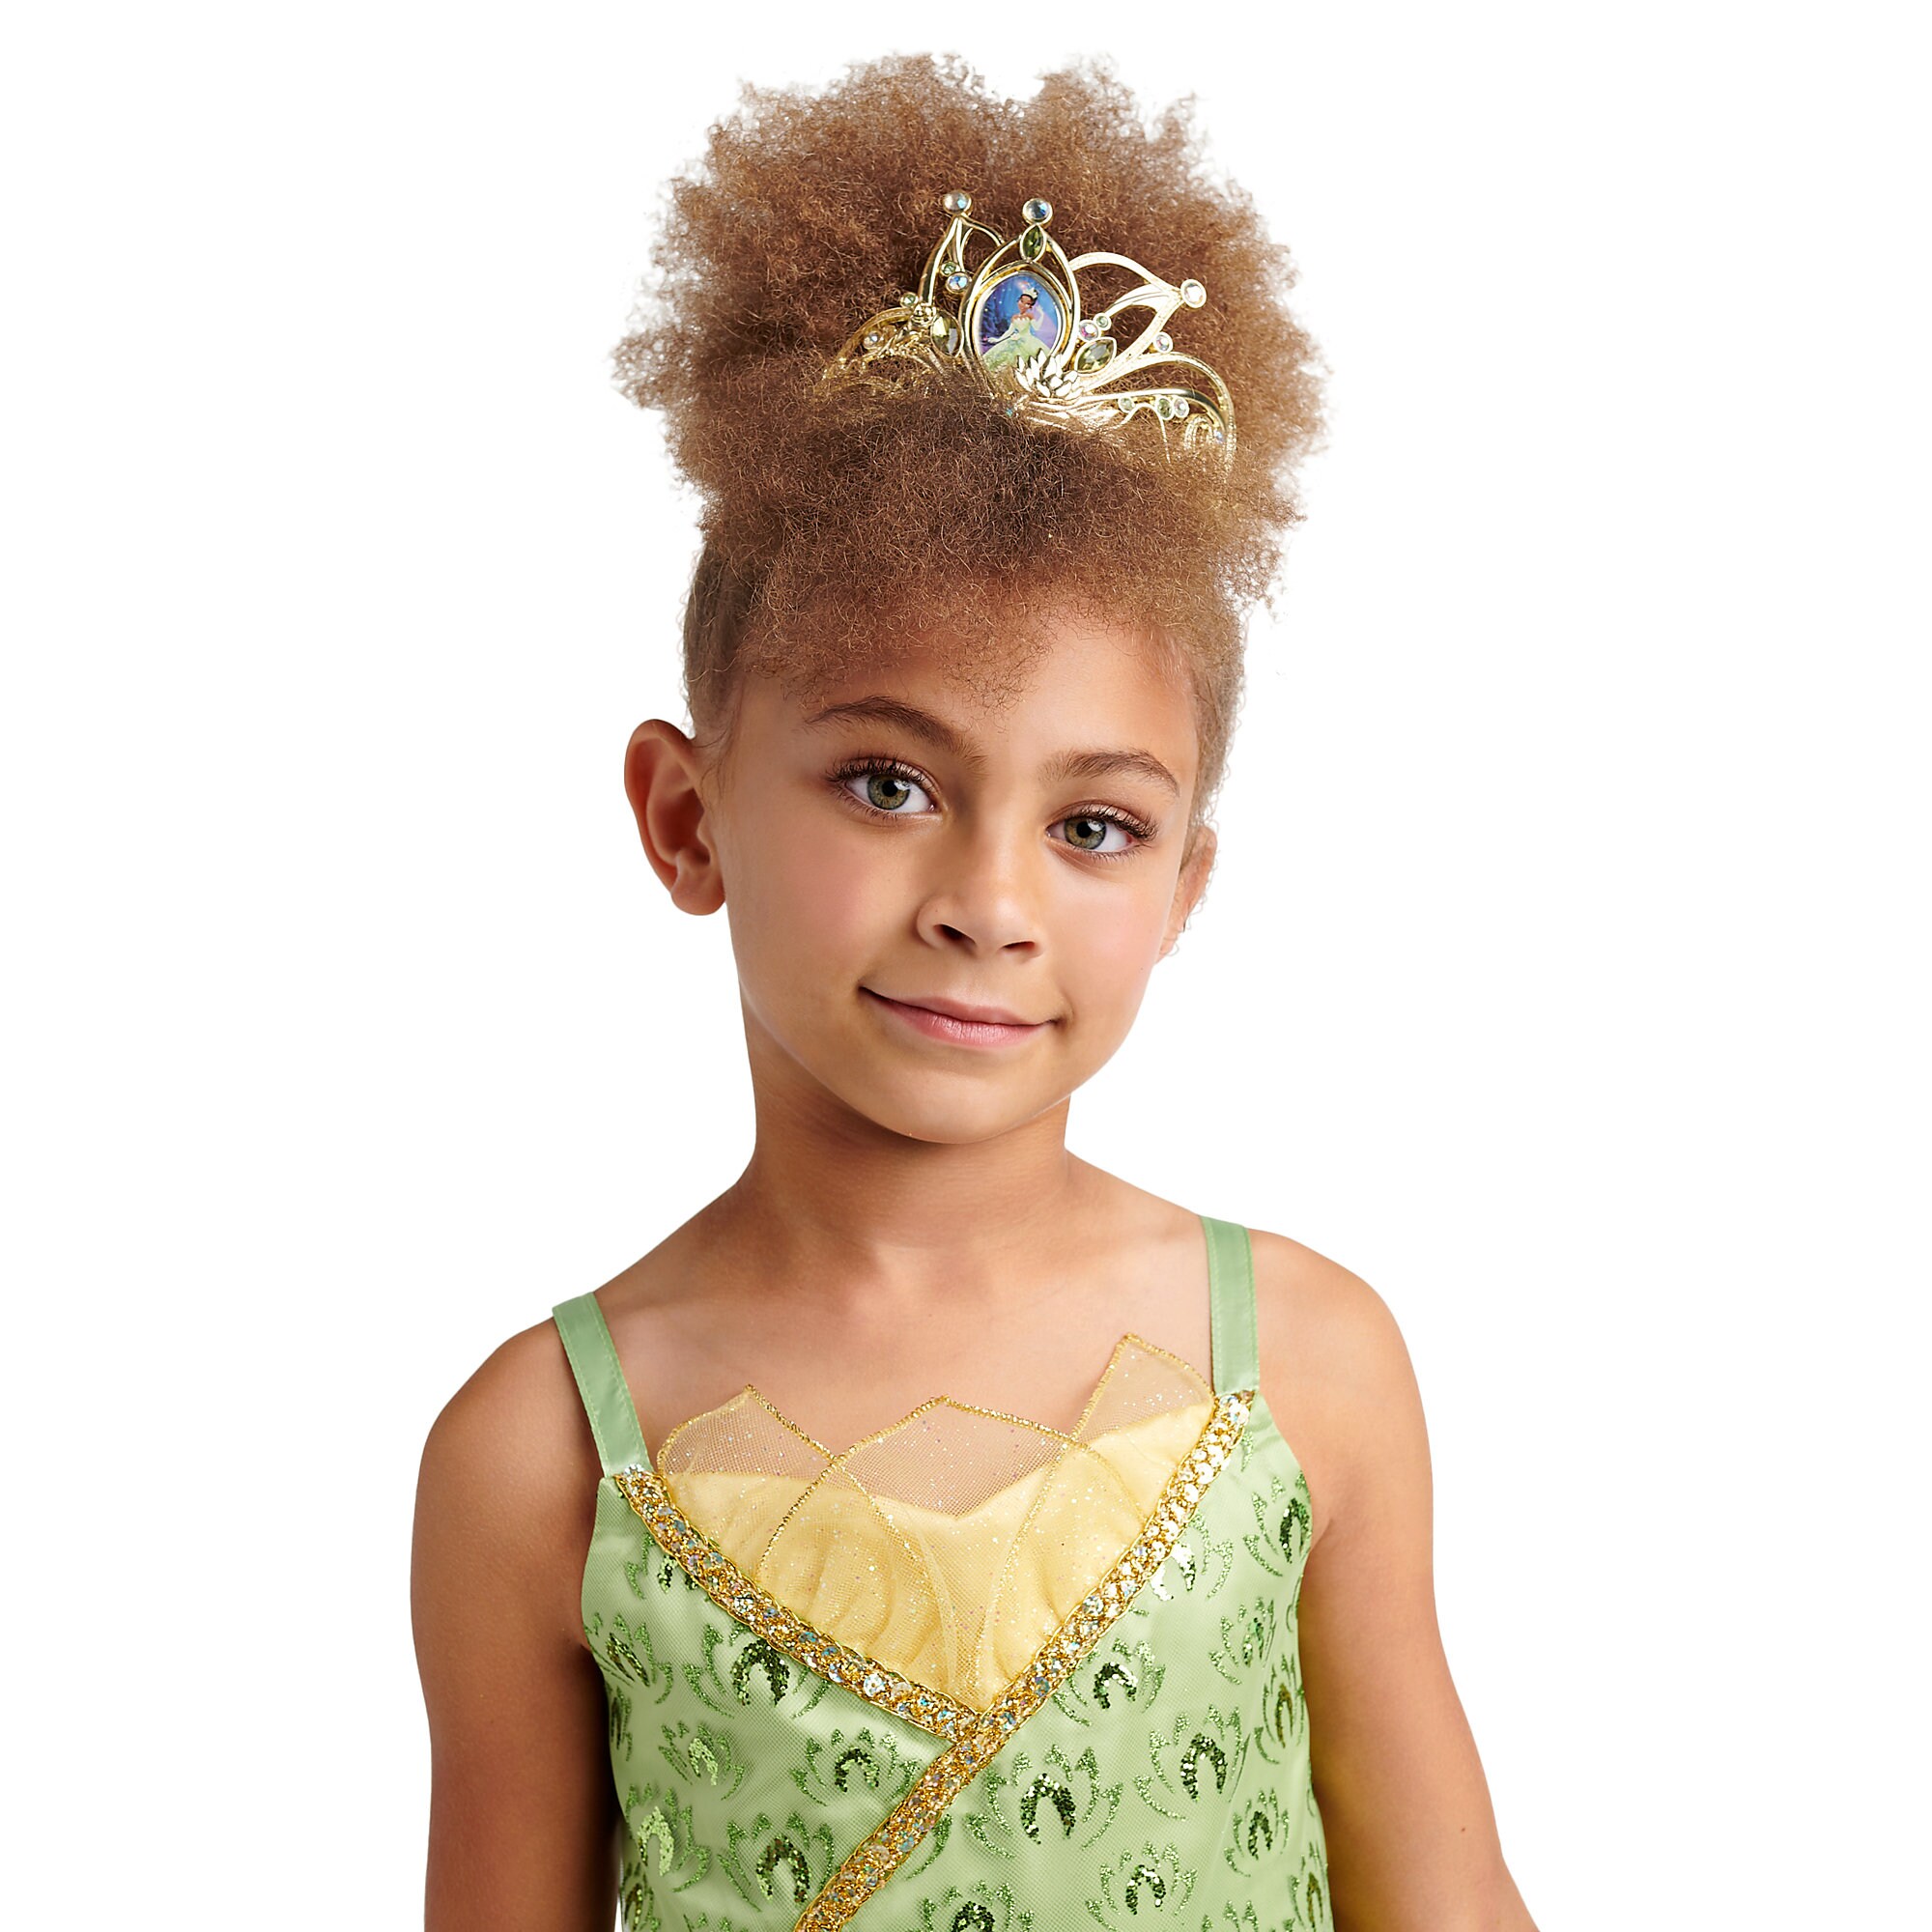 Tiana Costume for Kids - The Princess and the Frog